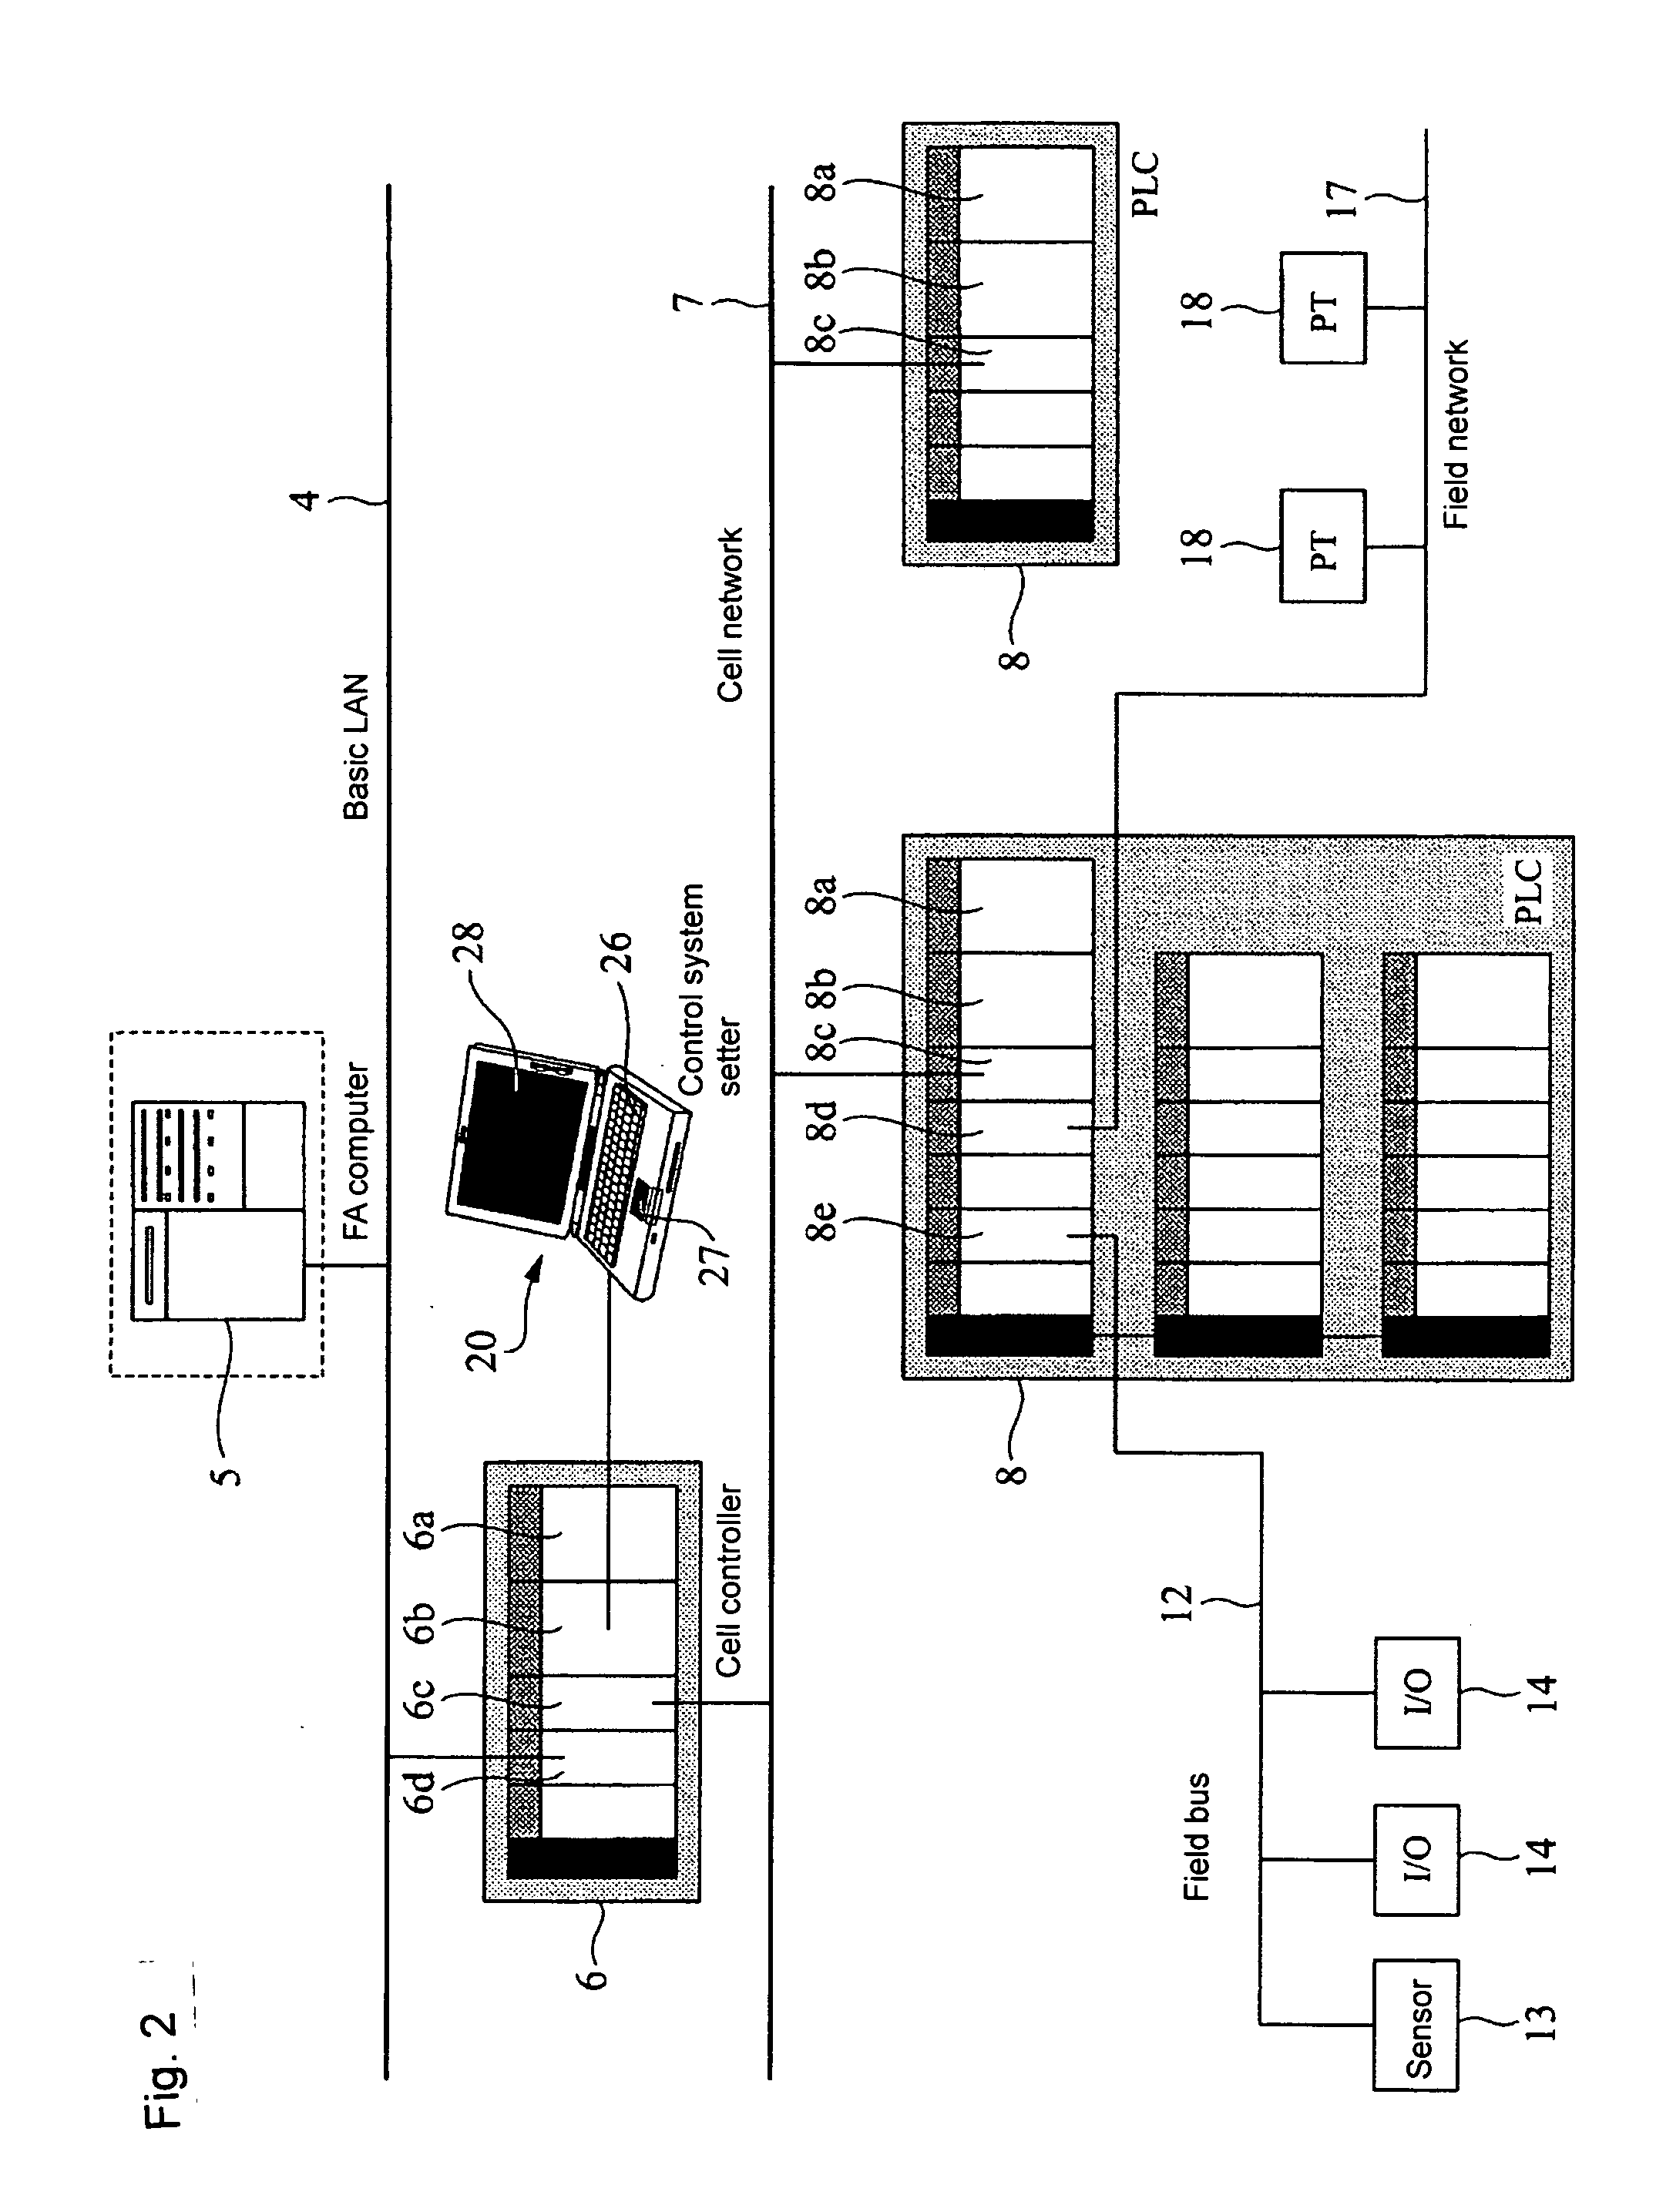 Control system apparatus, method for setting control system and setting program